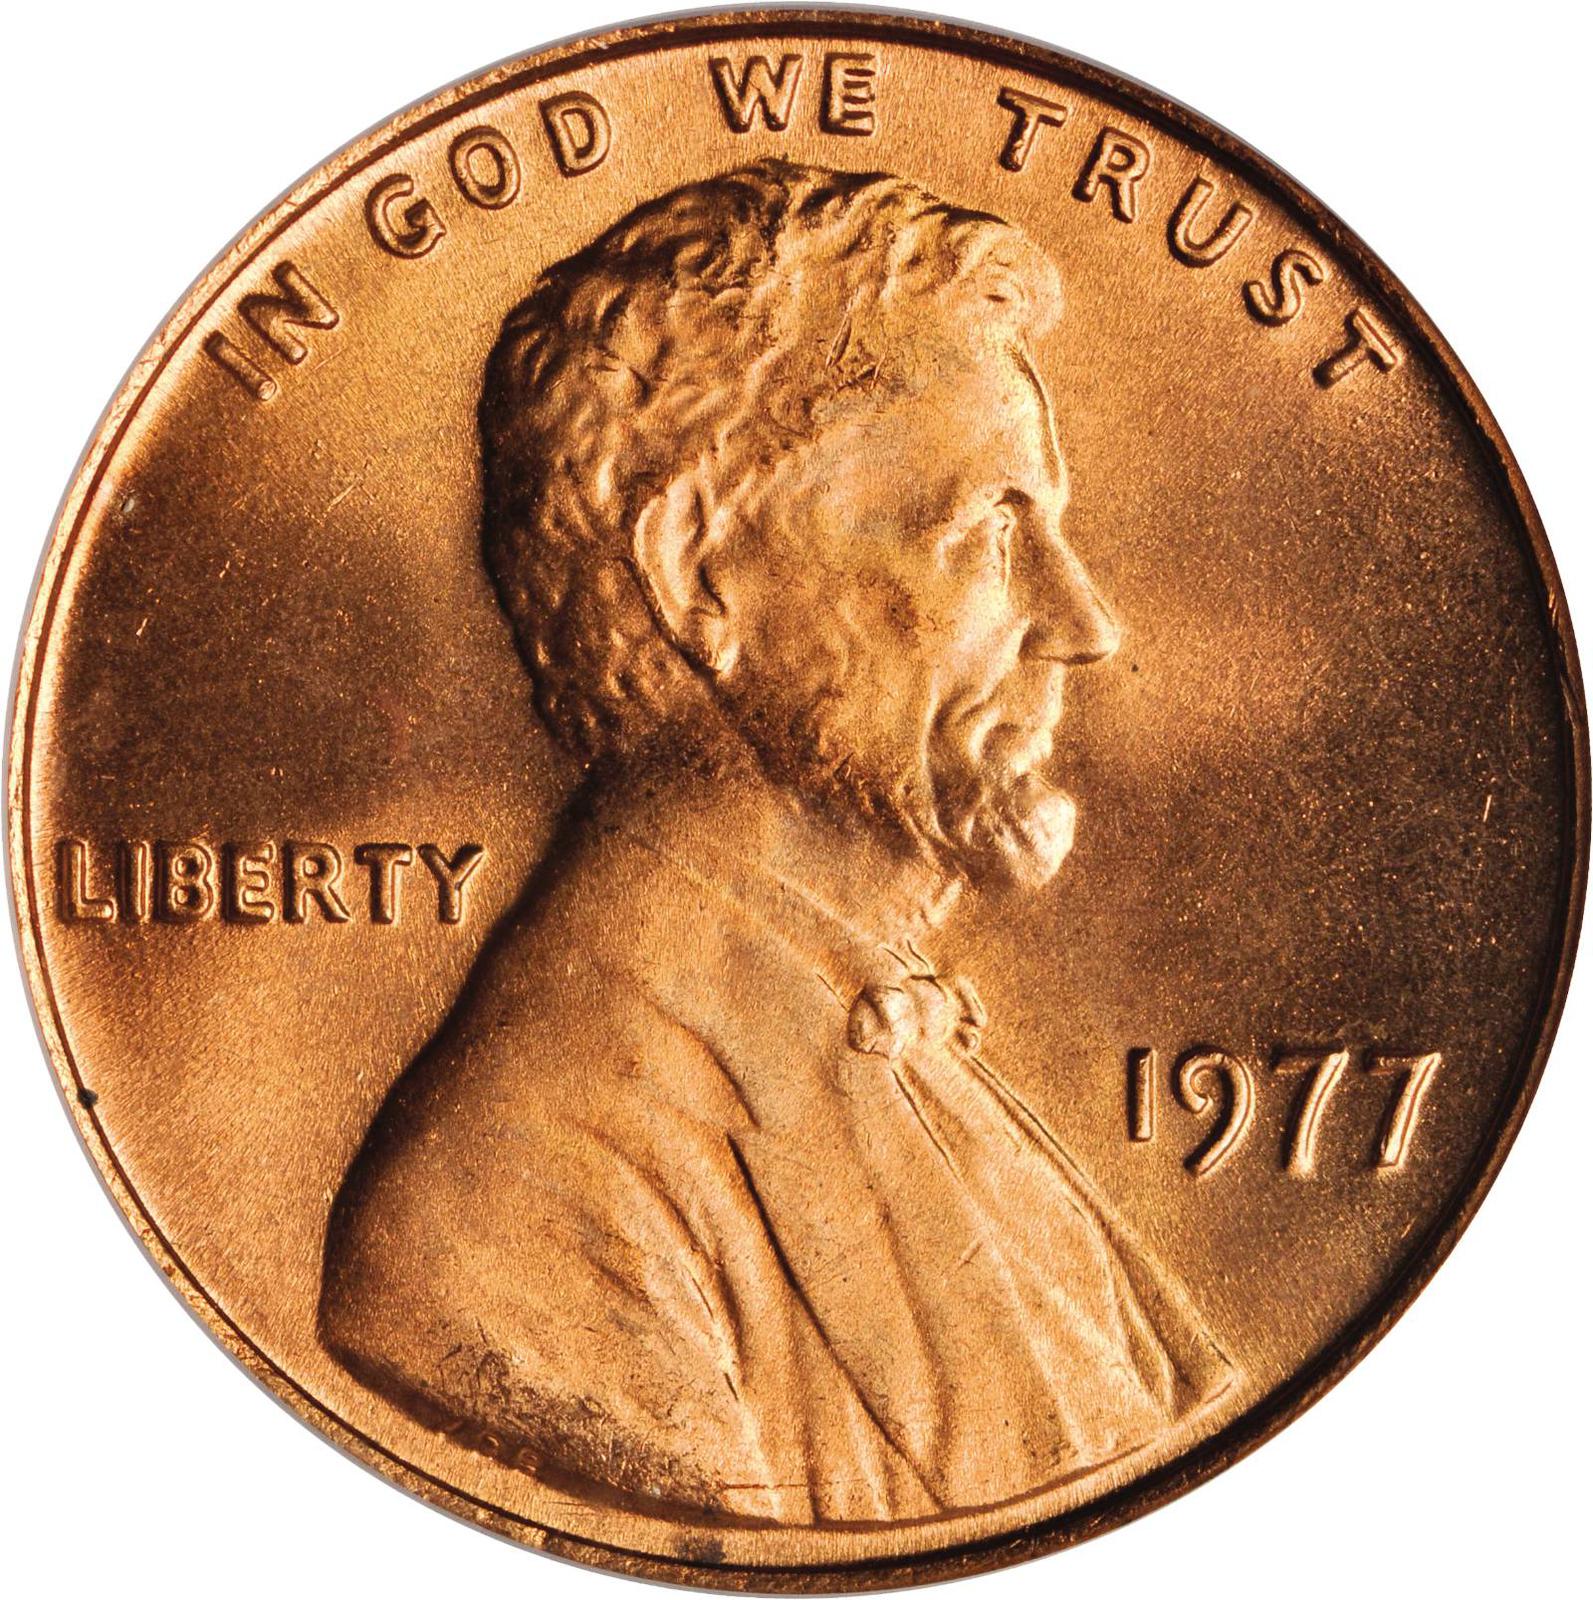 Value of 1977 Lincoln Cents